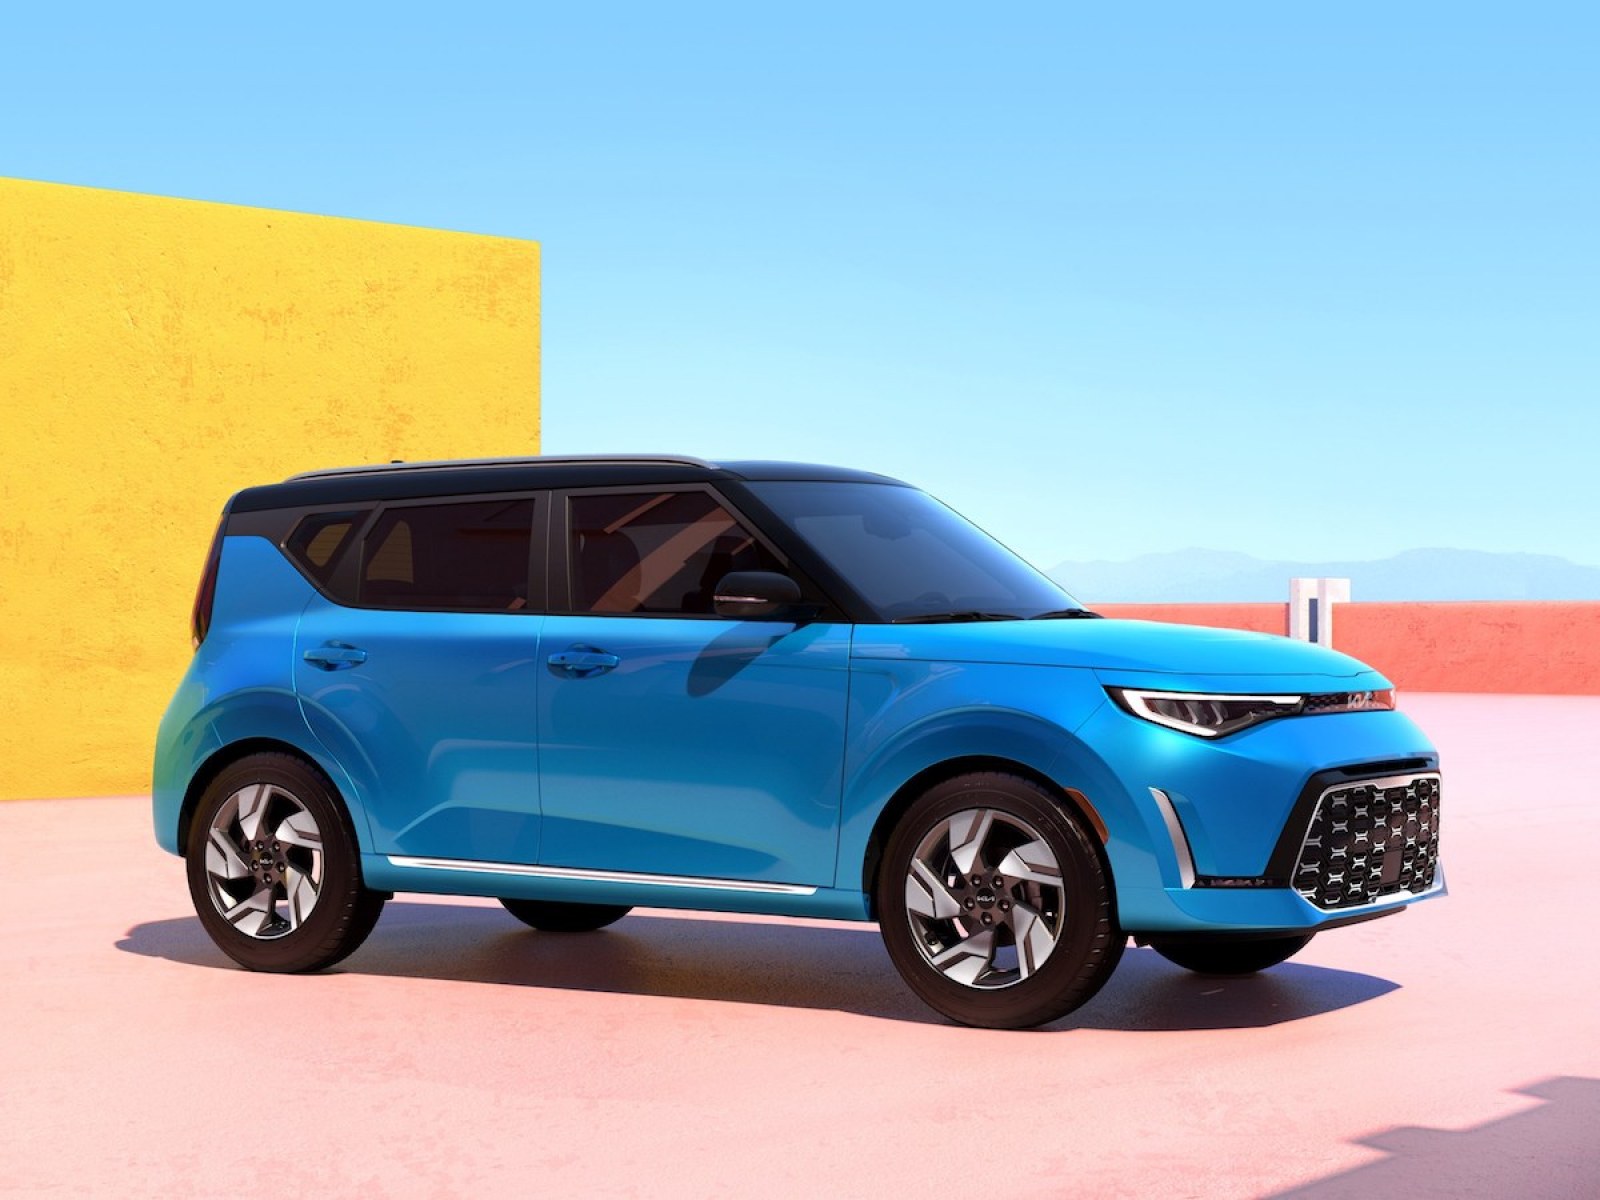 Kia Makes the Soul More Stylish, Adds Safety Tech for 2023